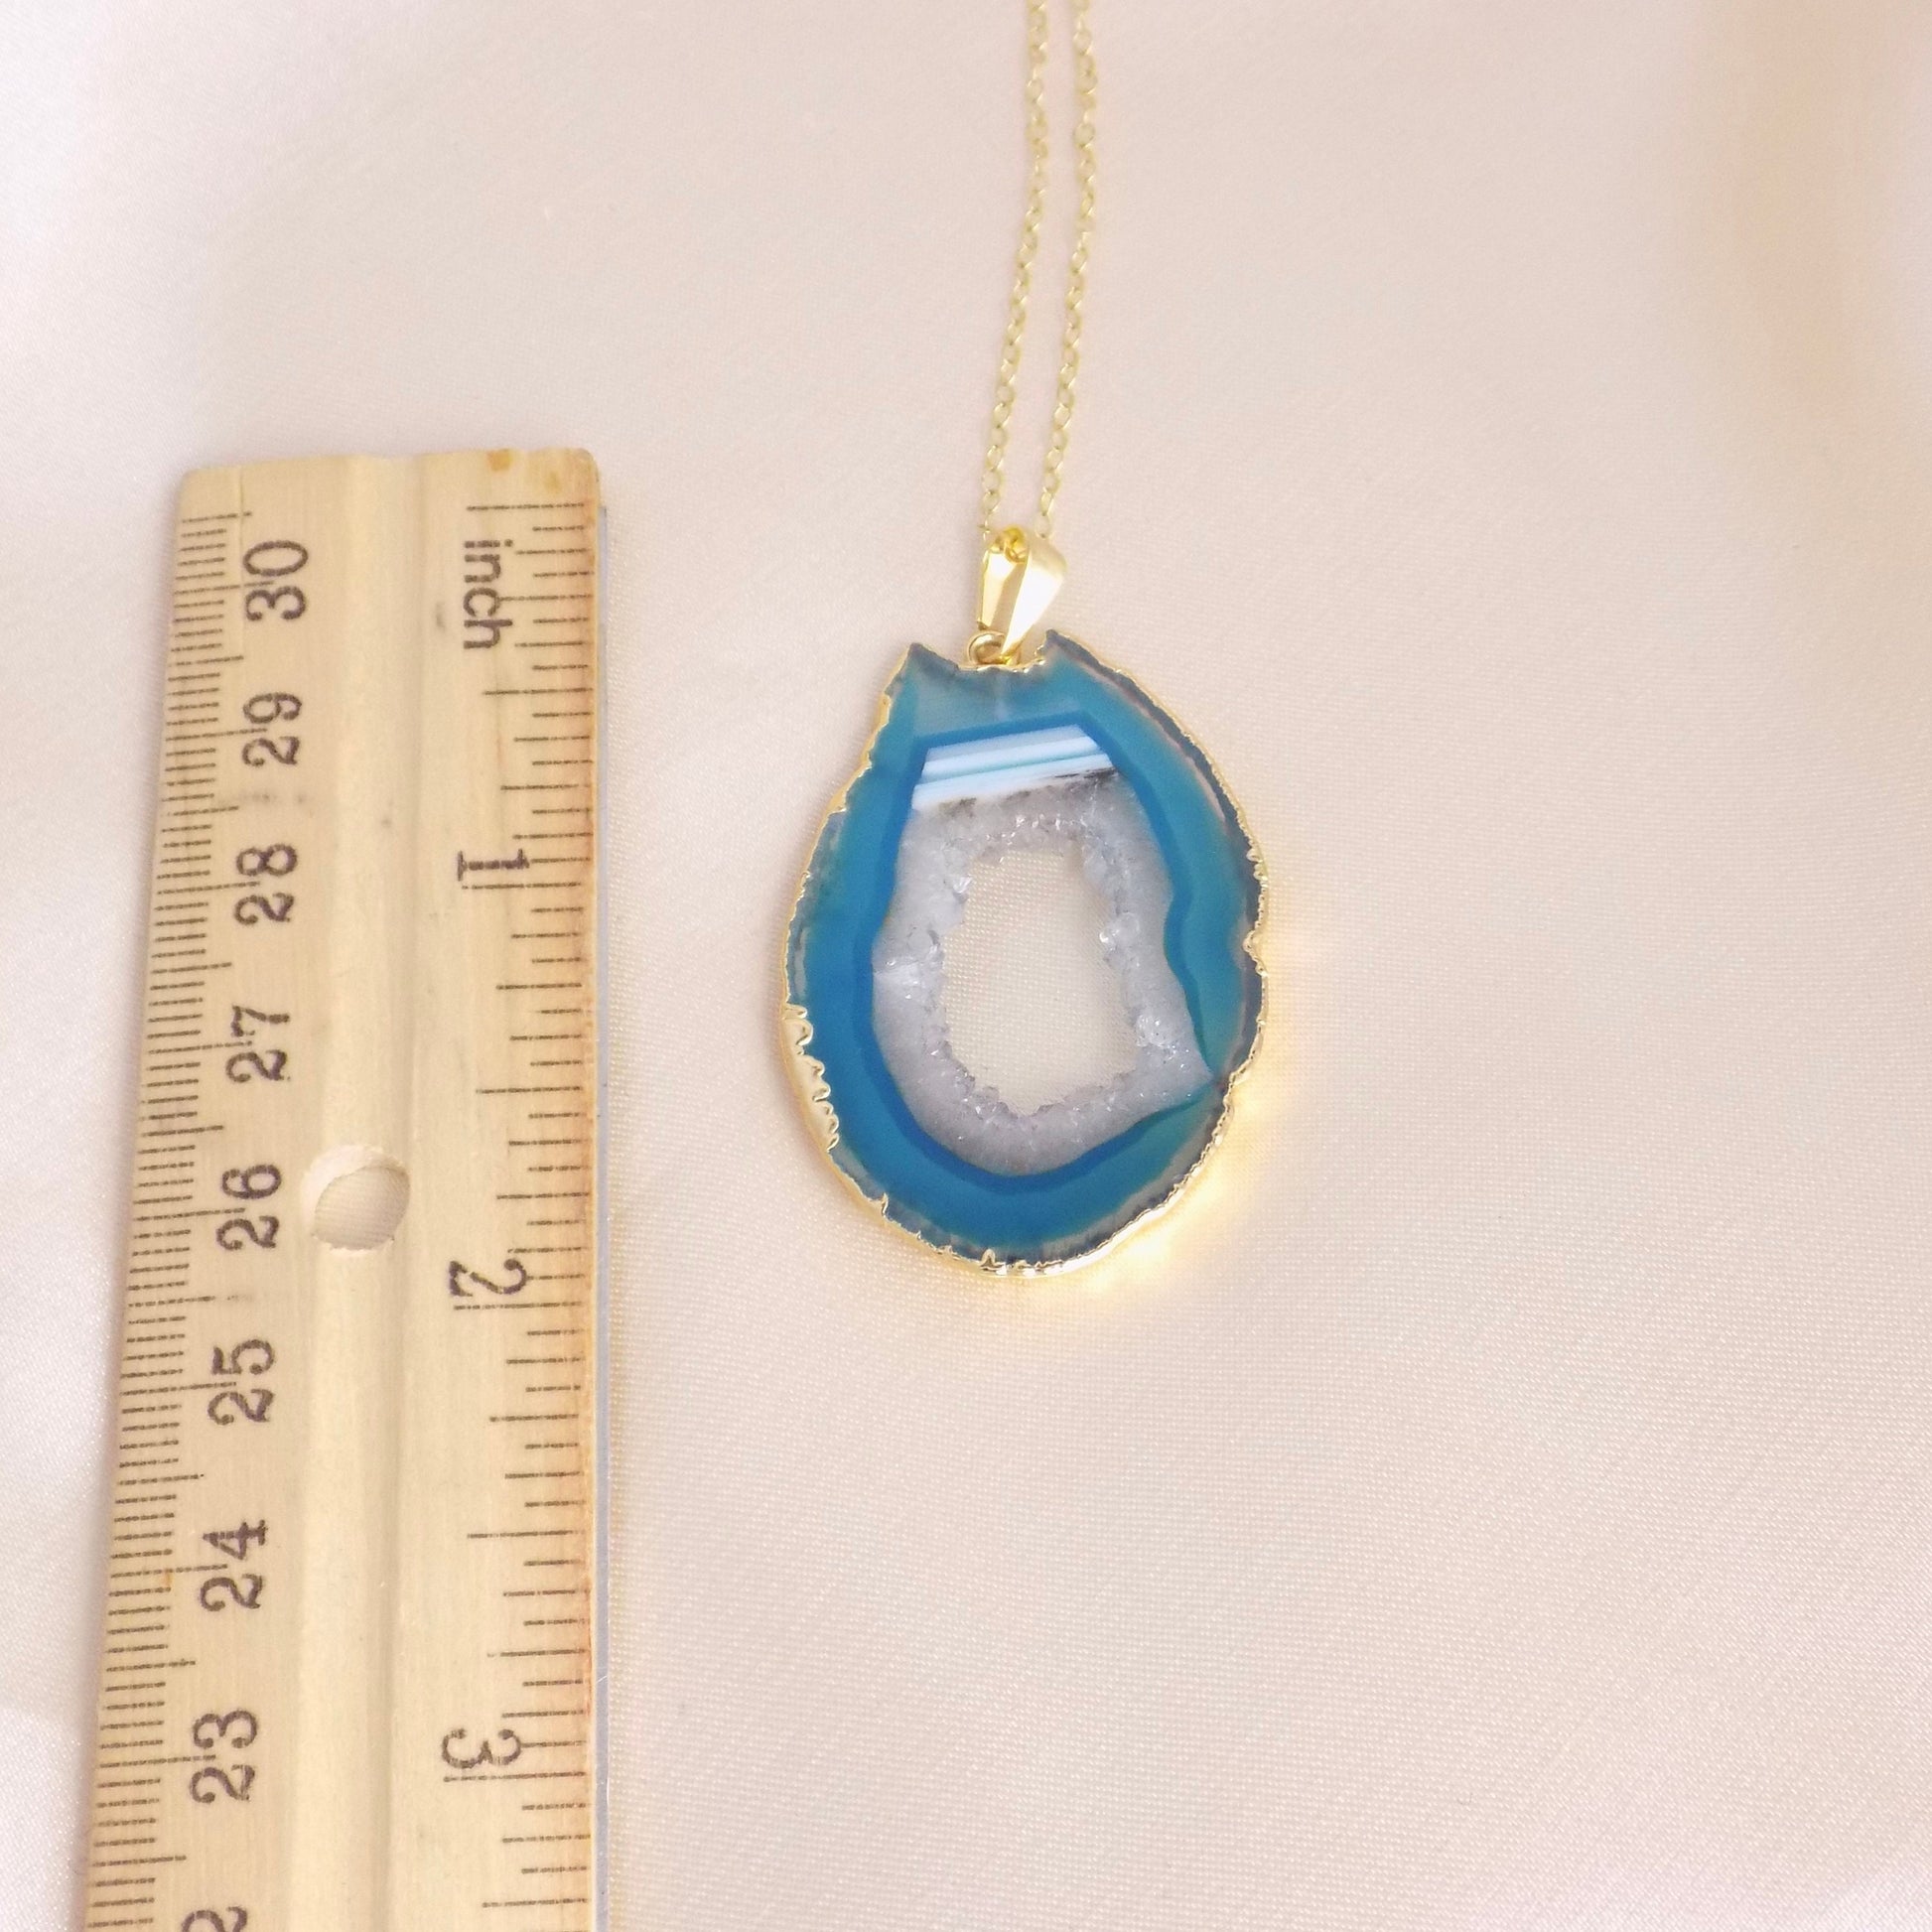 Unique Statement Necklace, Teal Blue Agate Pendant, Sliced Geode, Druzy Necklaces, 14K Gold Filled Chain, Gift For Her, G14-312